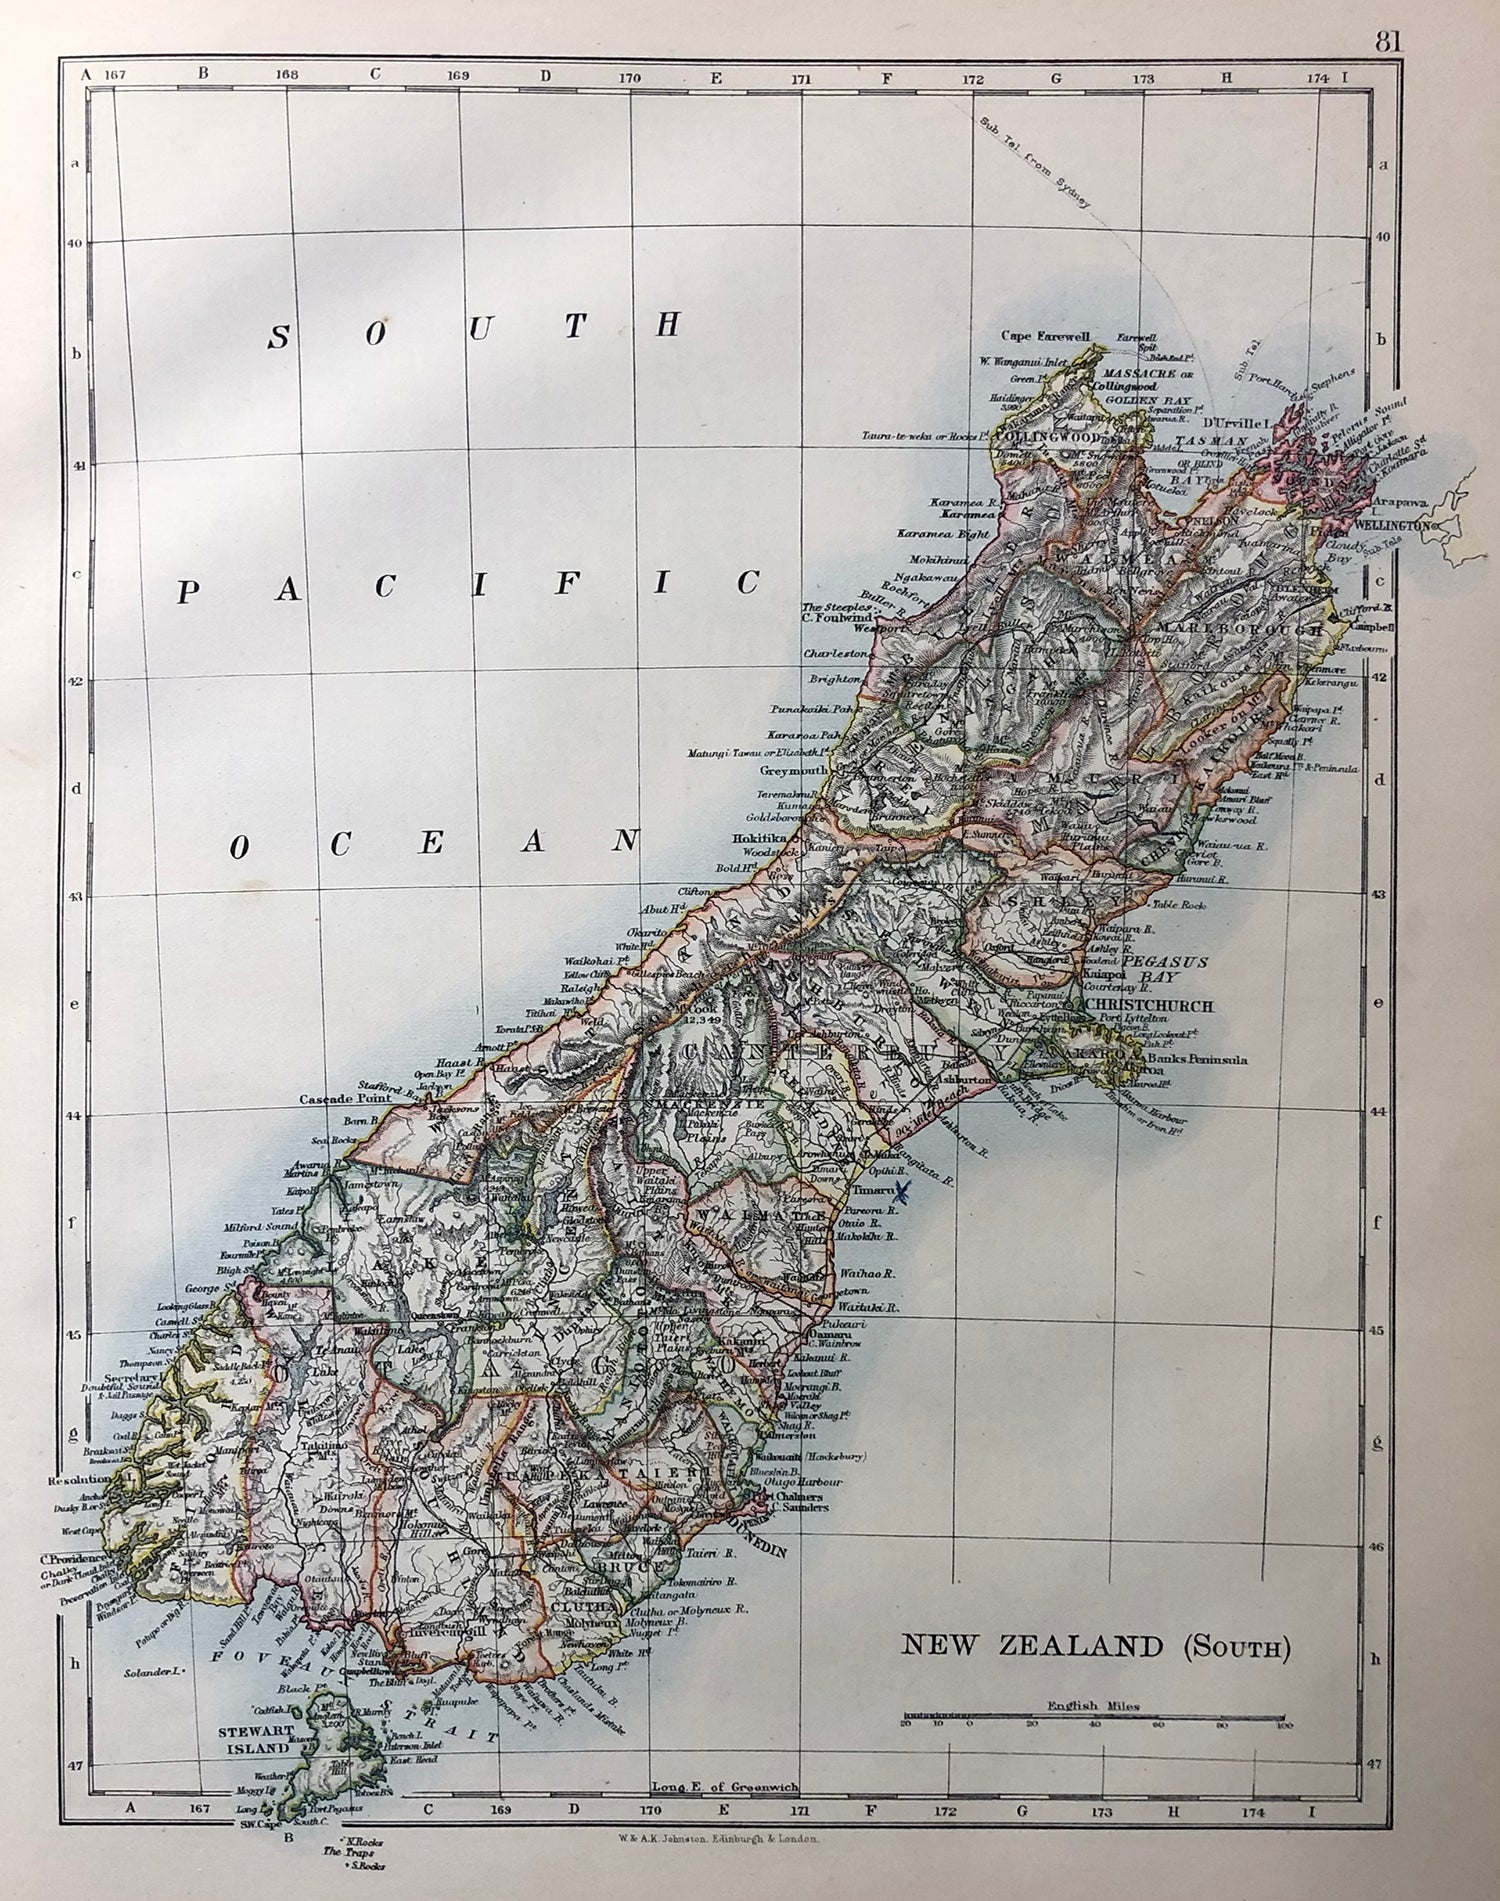 NEW ZEALAND (South)